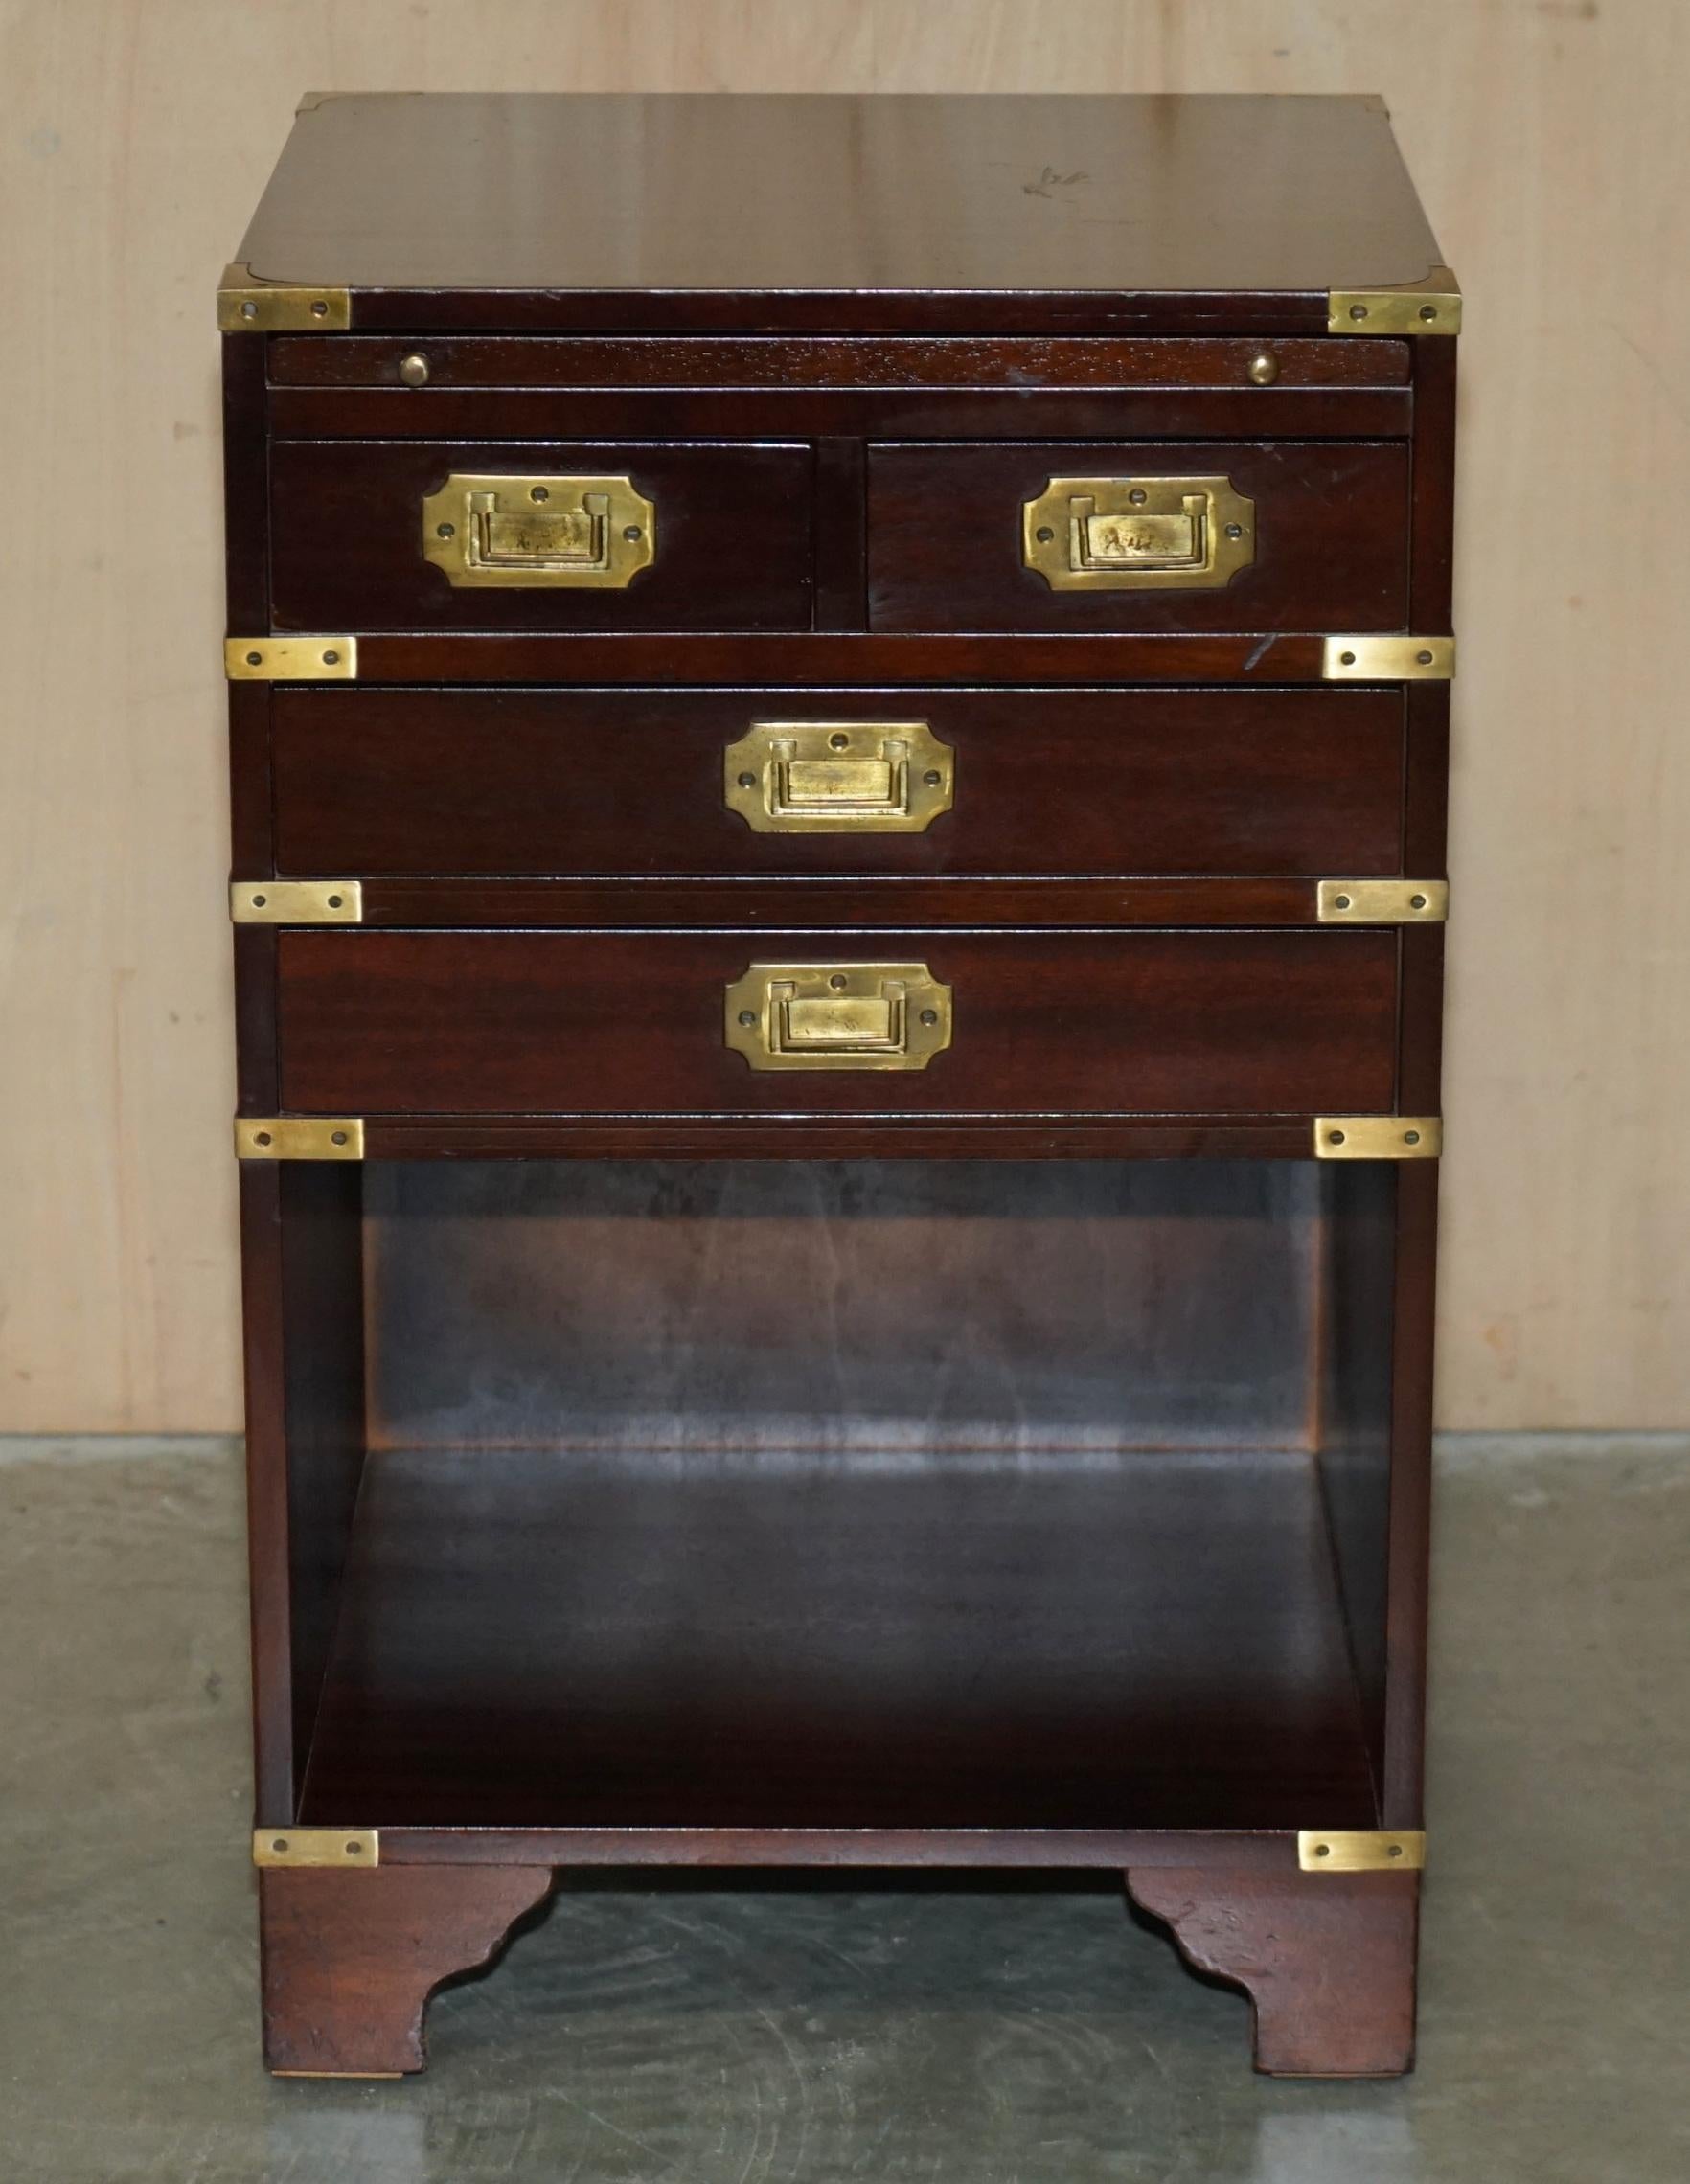 We are delighted to offer for sale this sublime vintage Harrods Kennedy mahogany & brass military campaign side table sized drawers with butlers serving tray.

A truly stunning and well made piece, it has the slip butlers serving tray, the idea